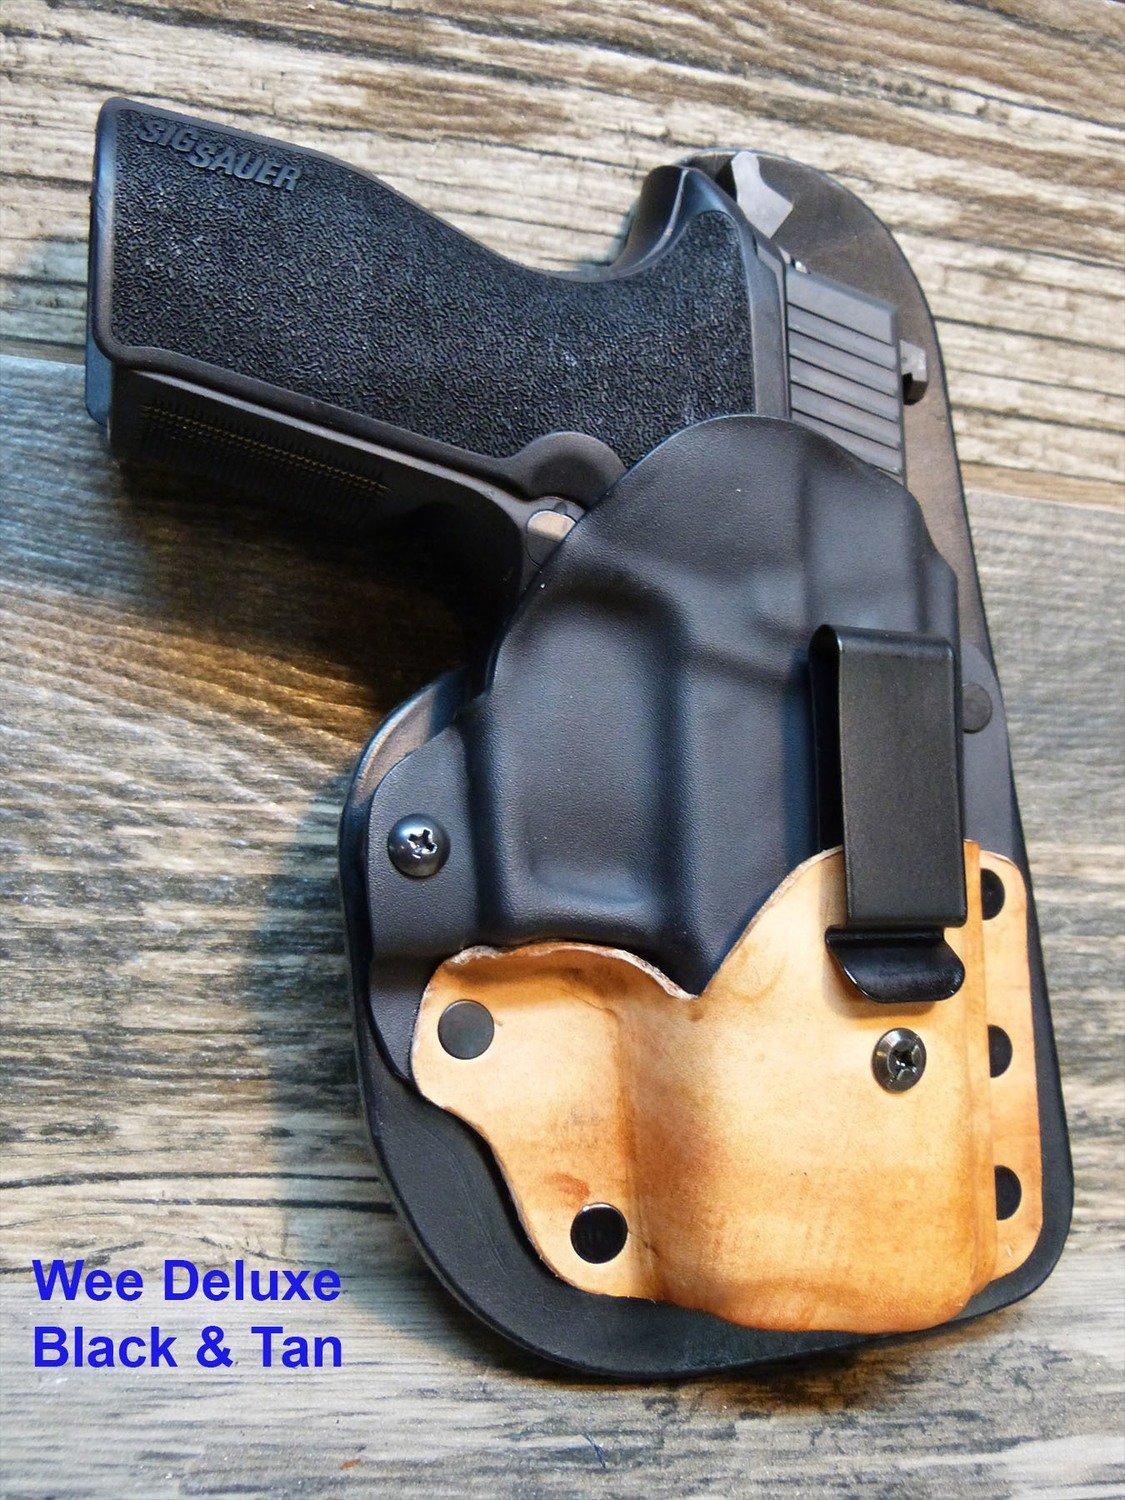 Smith & Wesson -Wee Deluxe - IWB Light or laser bearing Holster